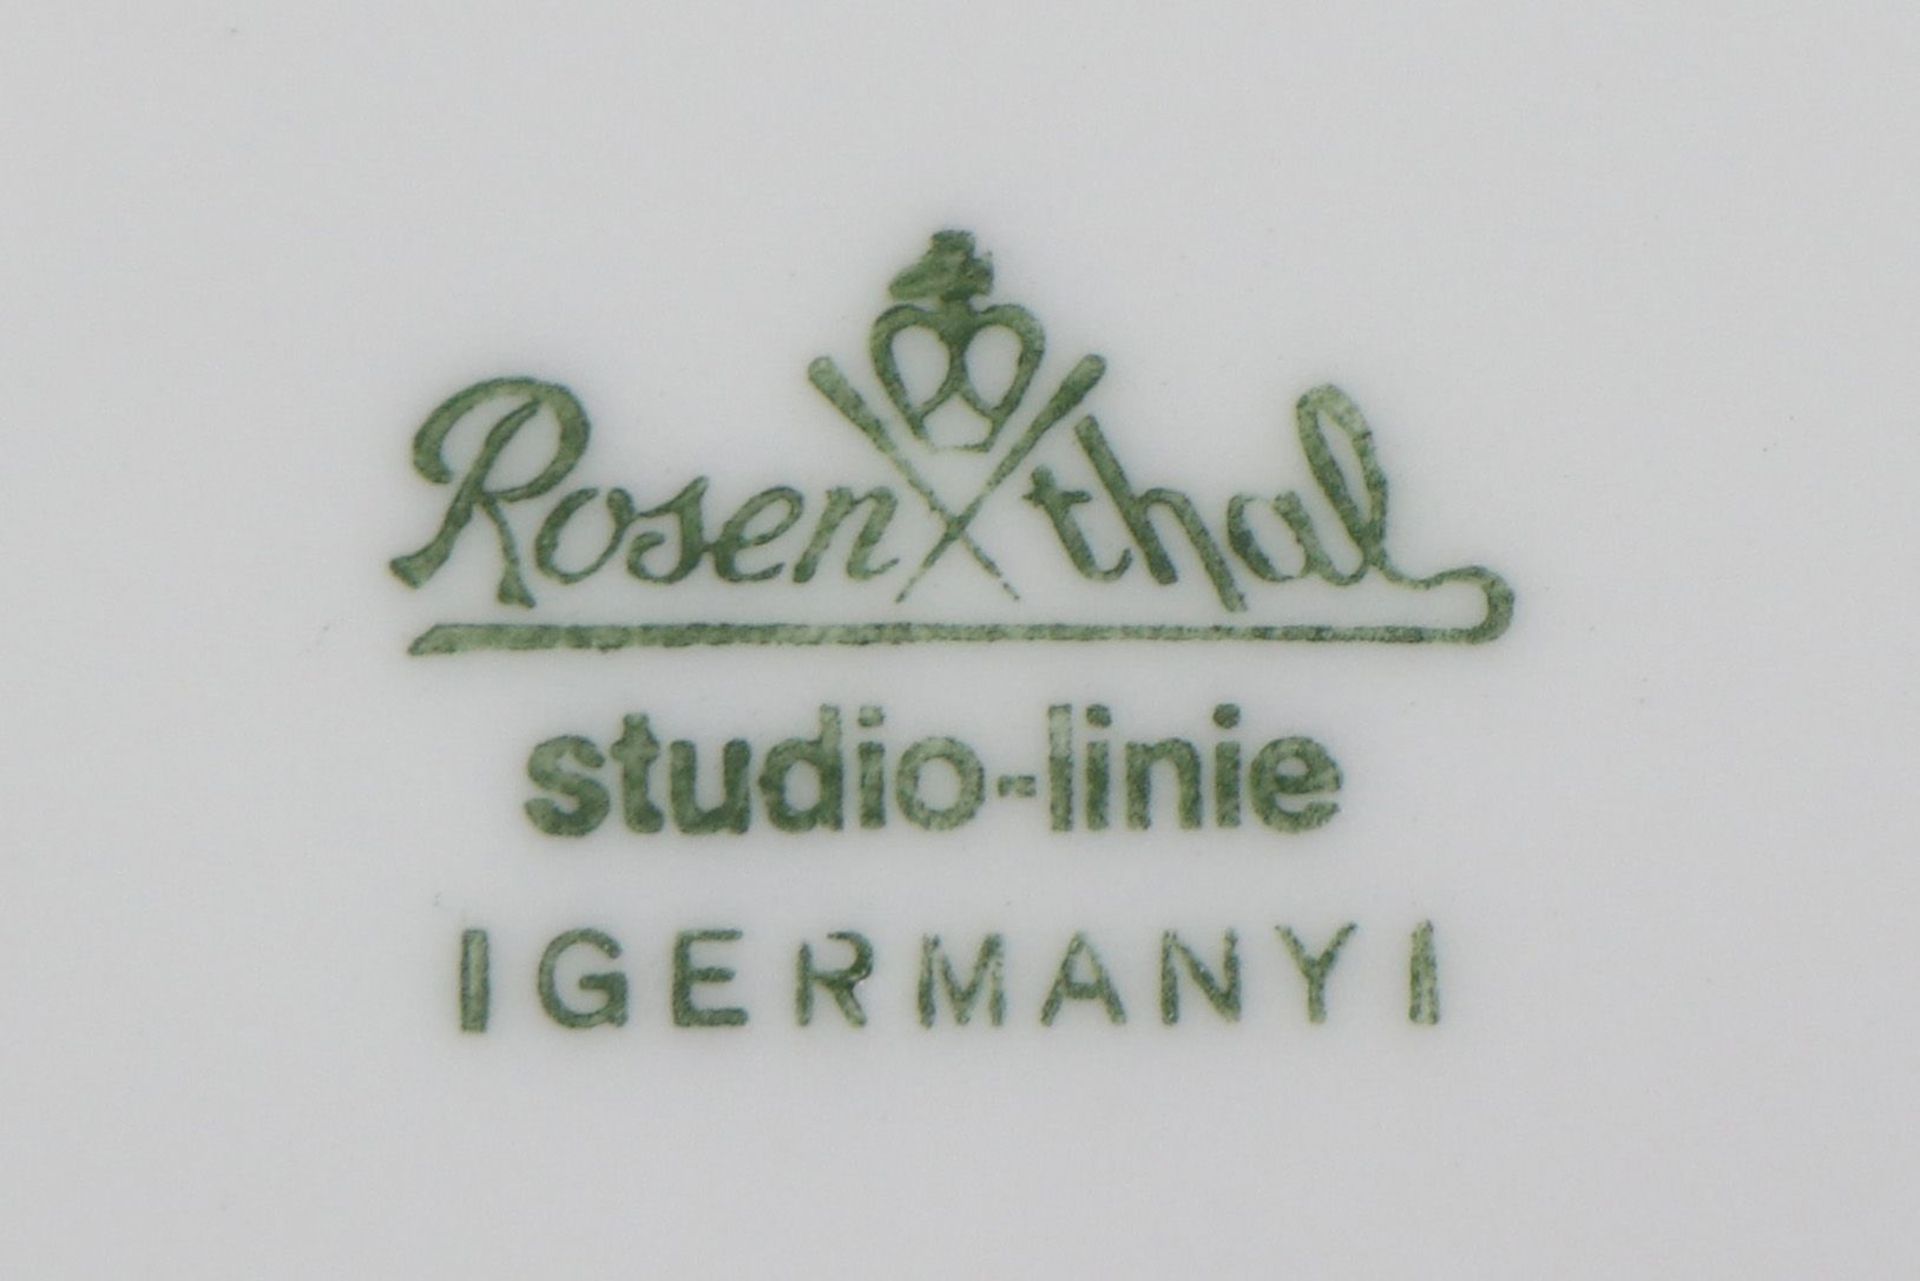 ROSENTHAL Teeservice - Image 4 of 4